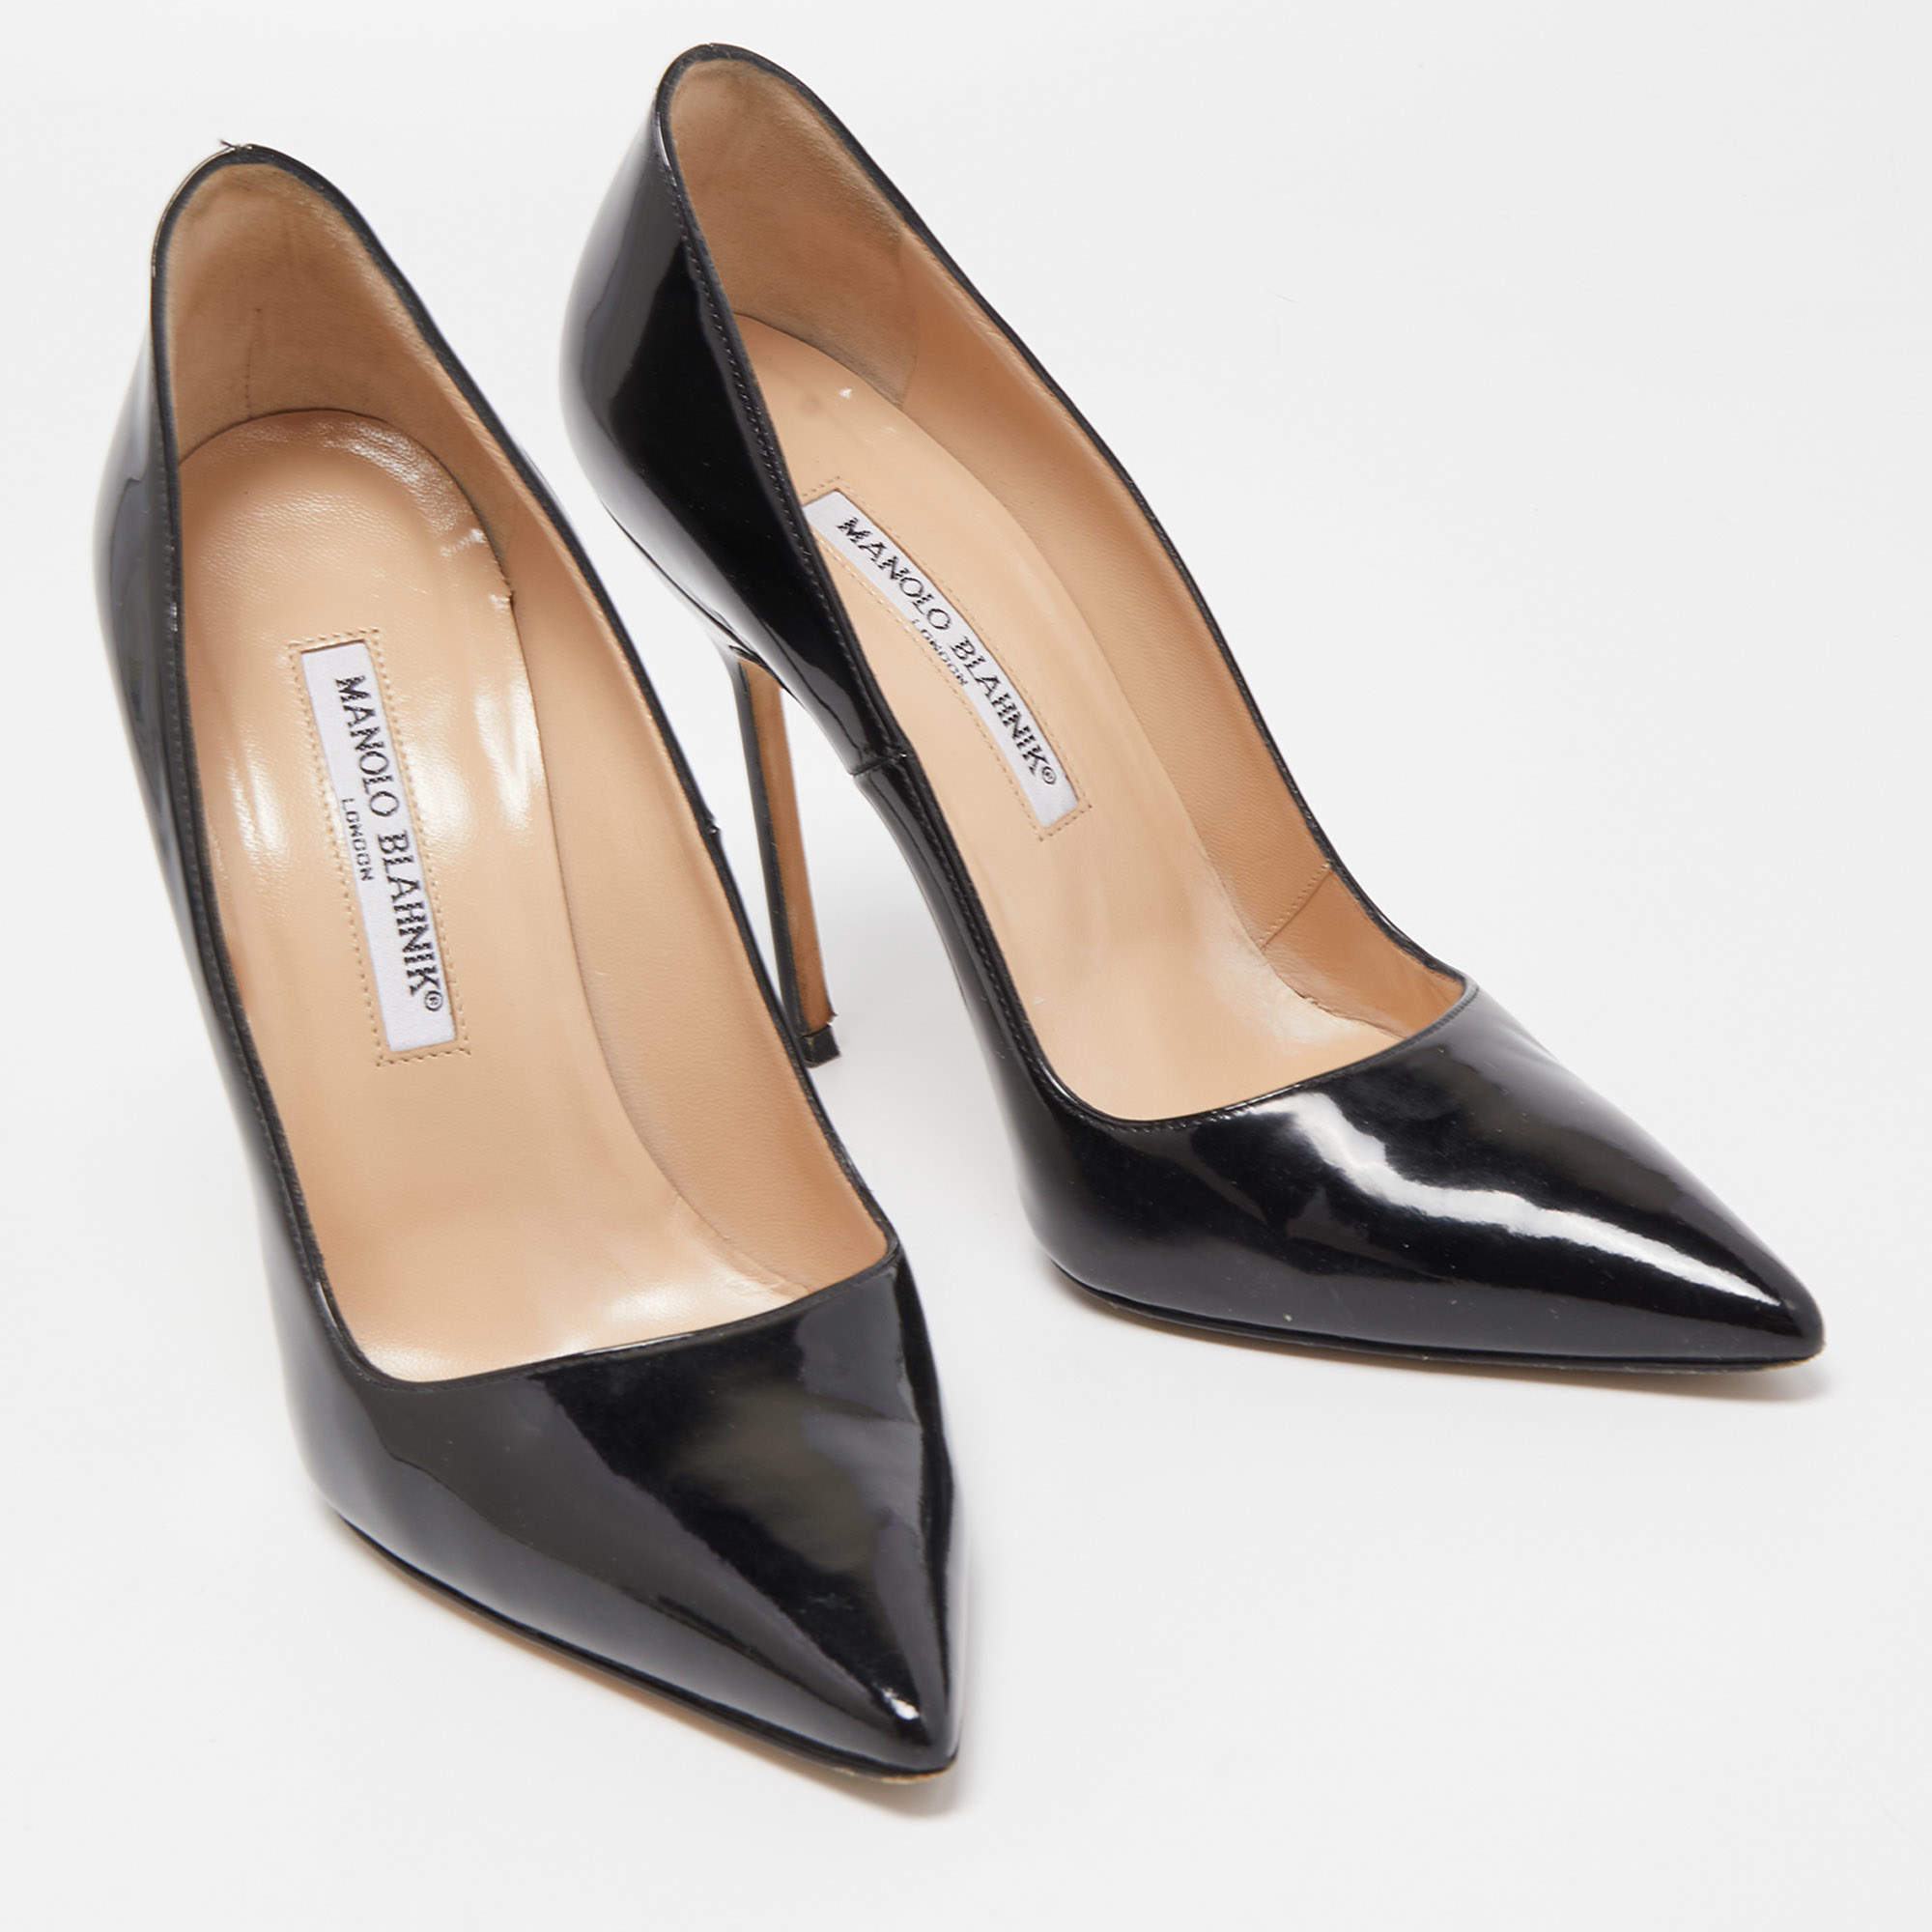 Manolo Blahnik Black Patent Leather Bb Pointed Toe Pumps Size 37.5